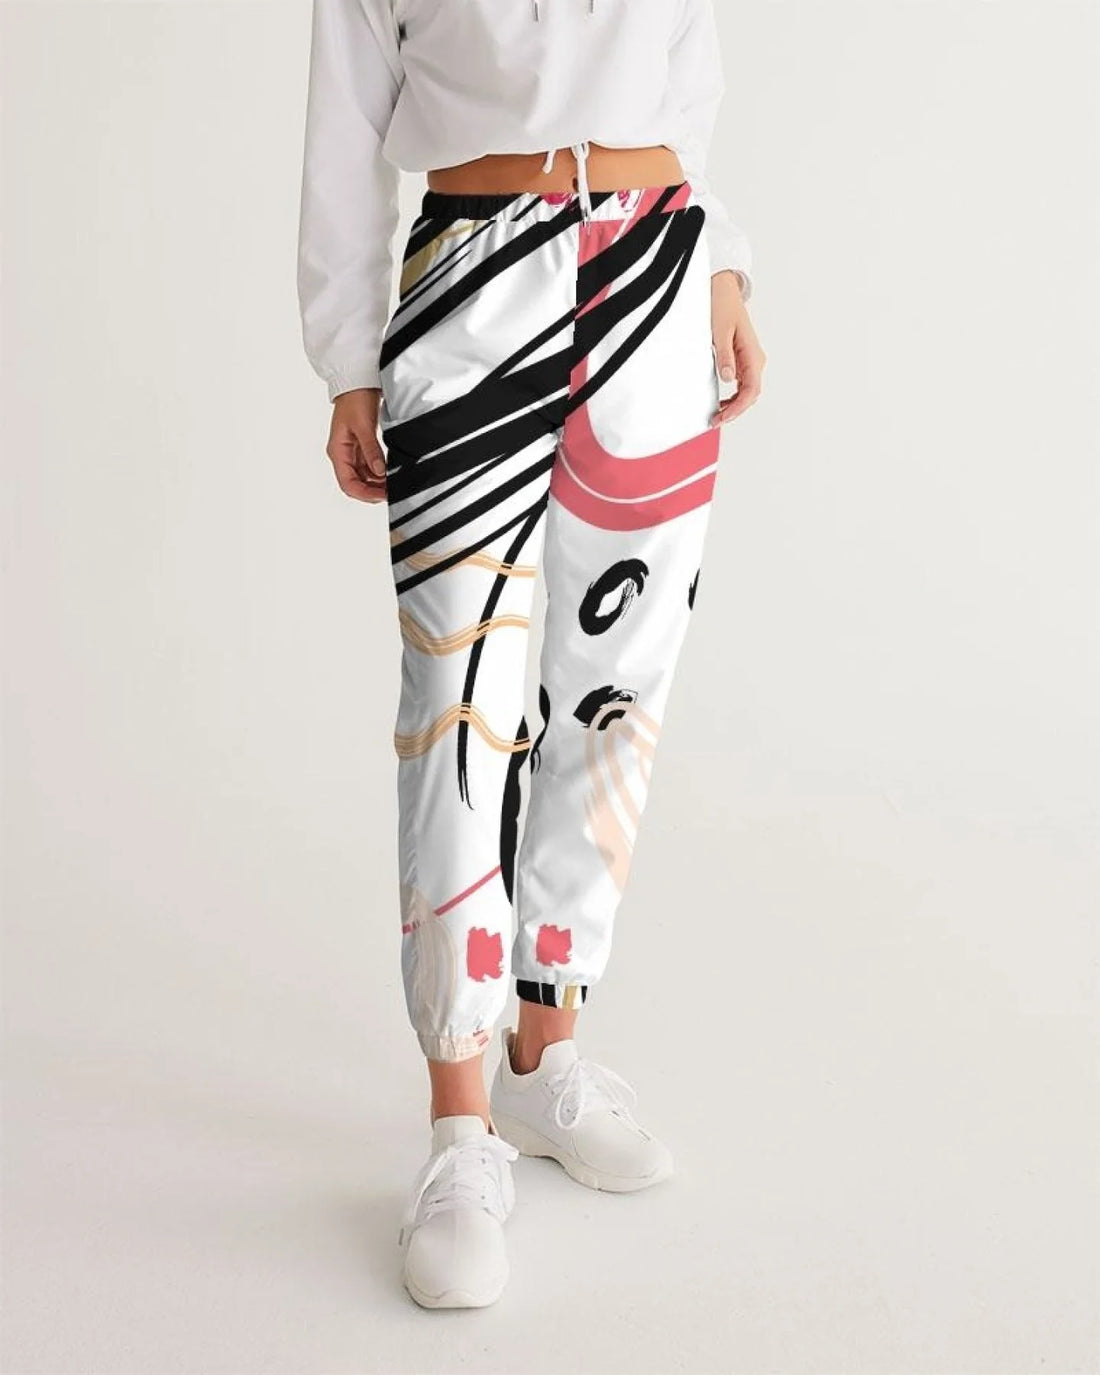 Activewear Elegance Elevate Your Gym Look with Coordinated Sets